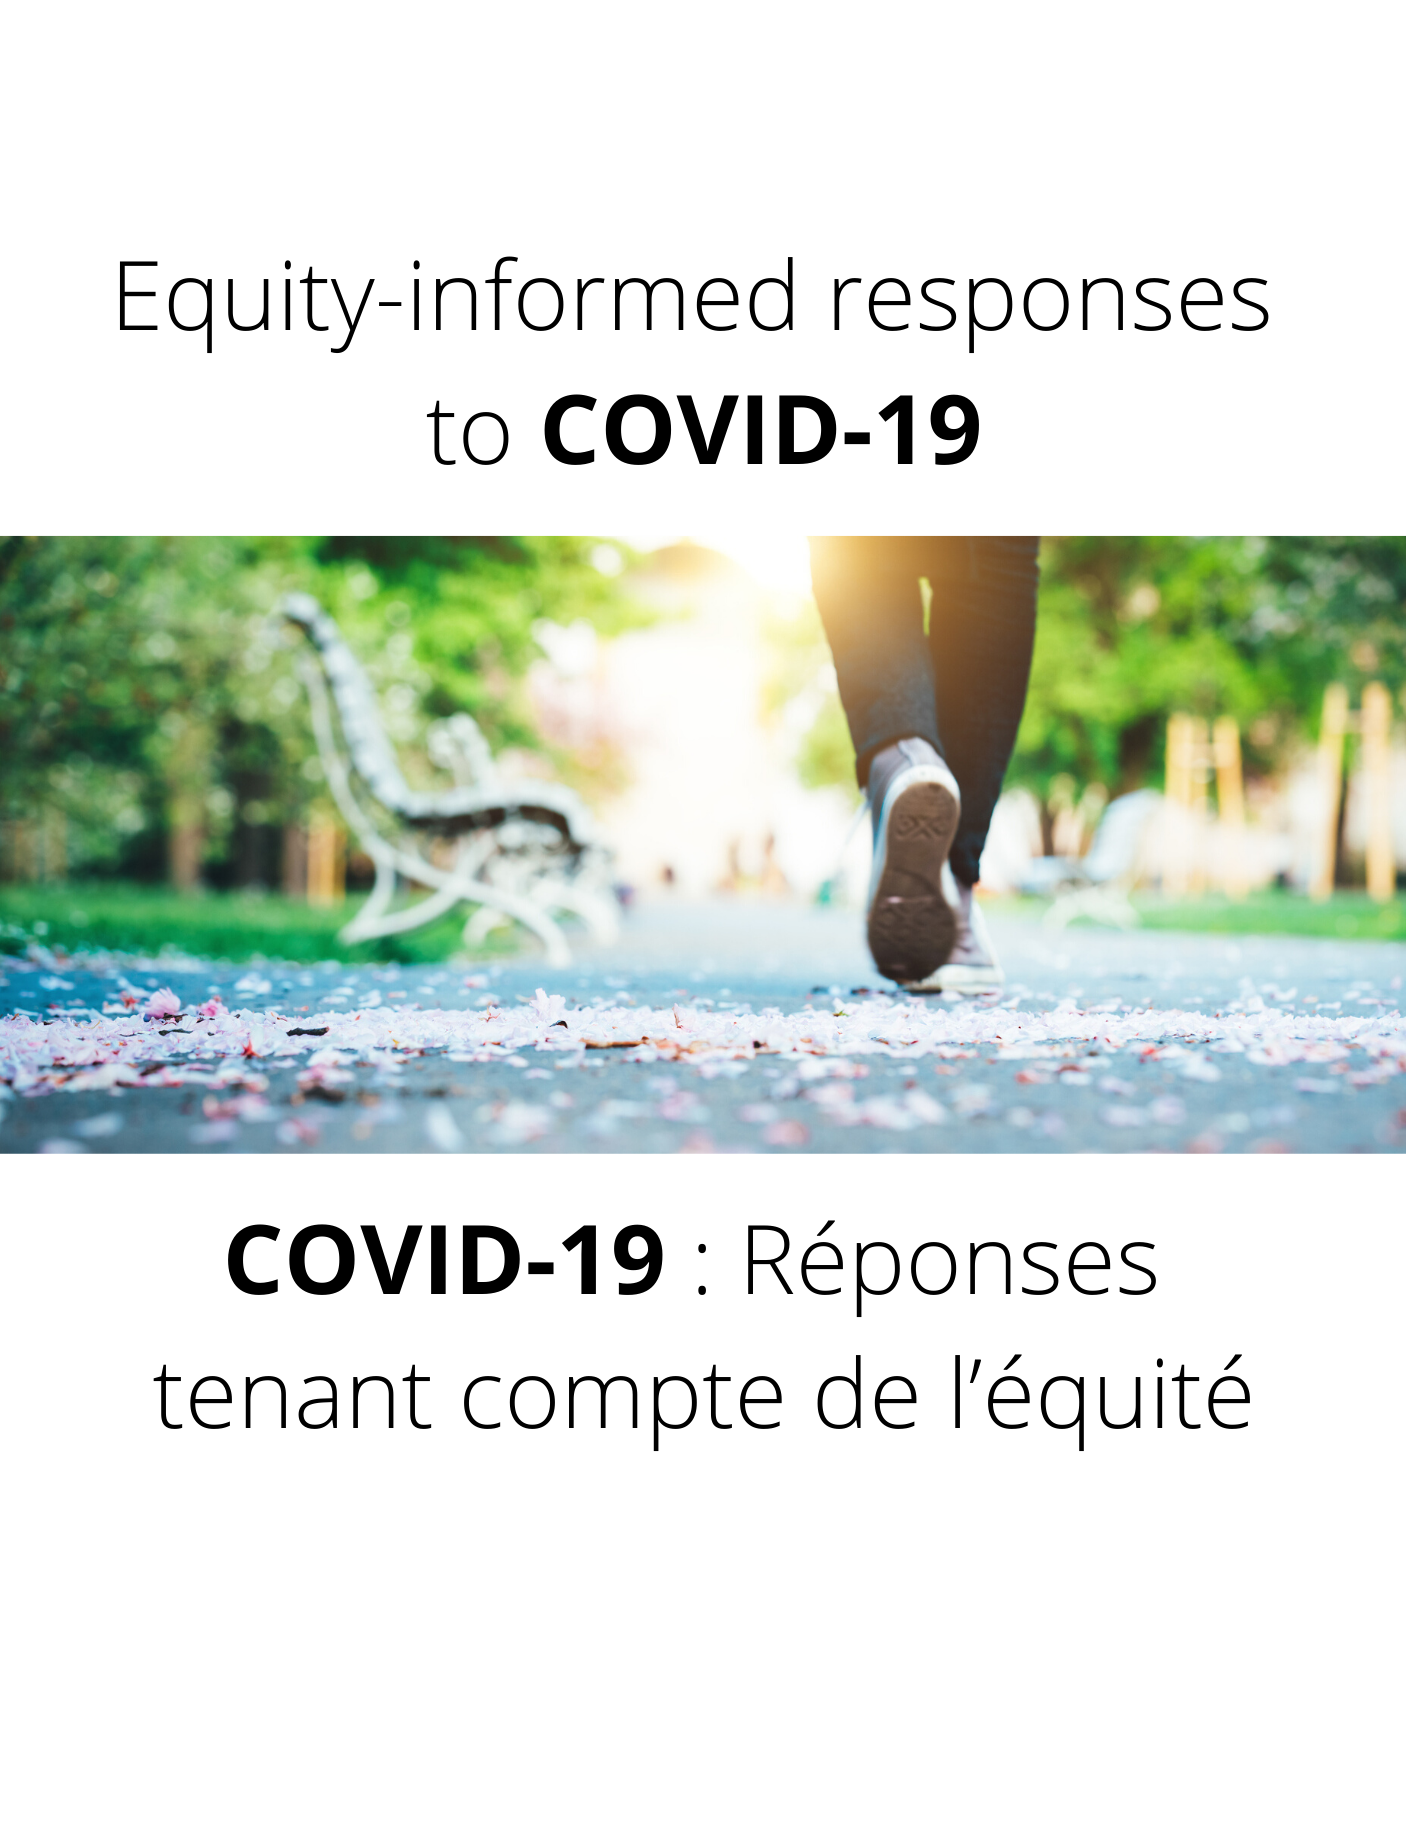 Interim guidance for homeless service providers to plan and respond to coronavirus disease 2019 (CO